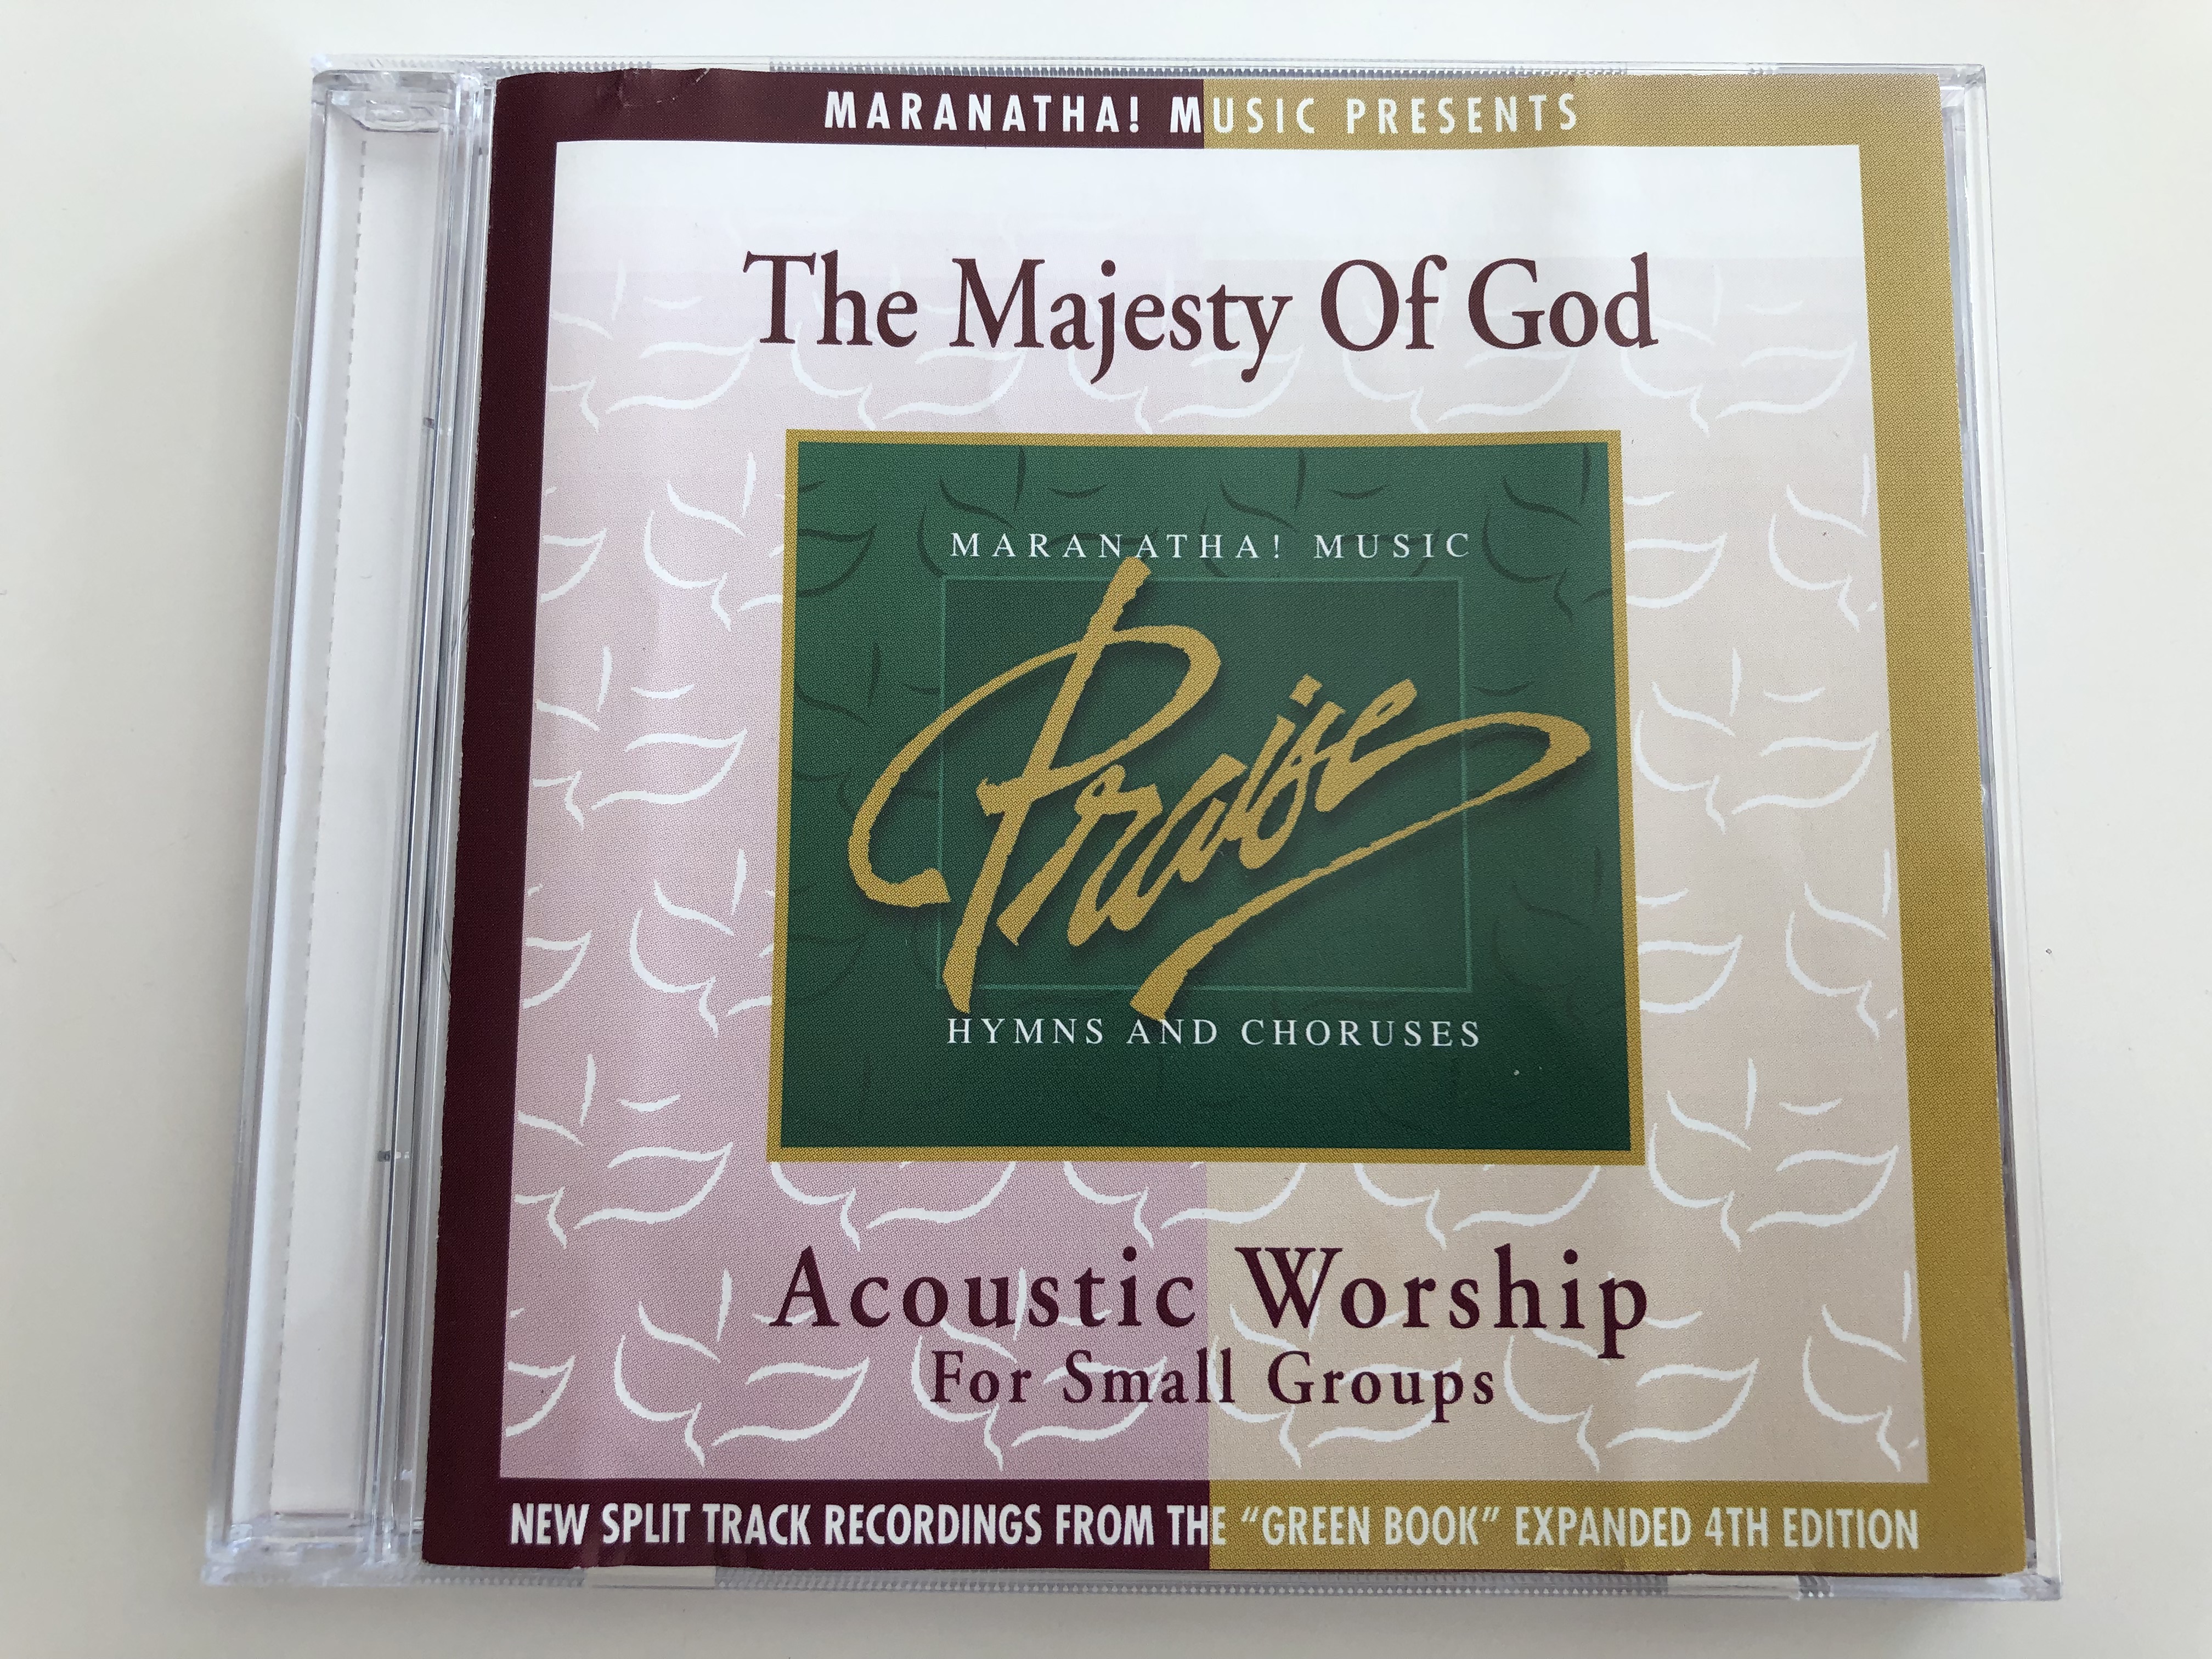 the-majesty-of-god-praise-hymns-and-choruses-acoustic-worship-for-small-groups-maranatha-music-new-split-track-recordings-from-the-green-book-expanded-4th-edition-audio-cd-1998-1-.jpg